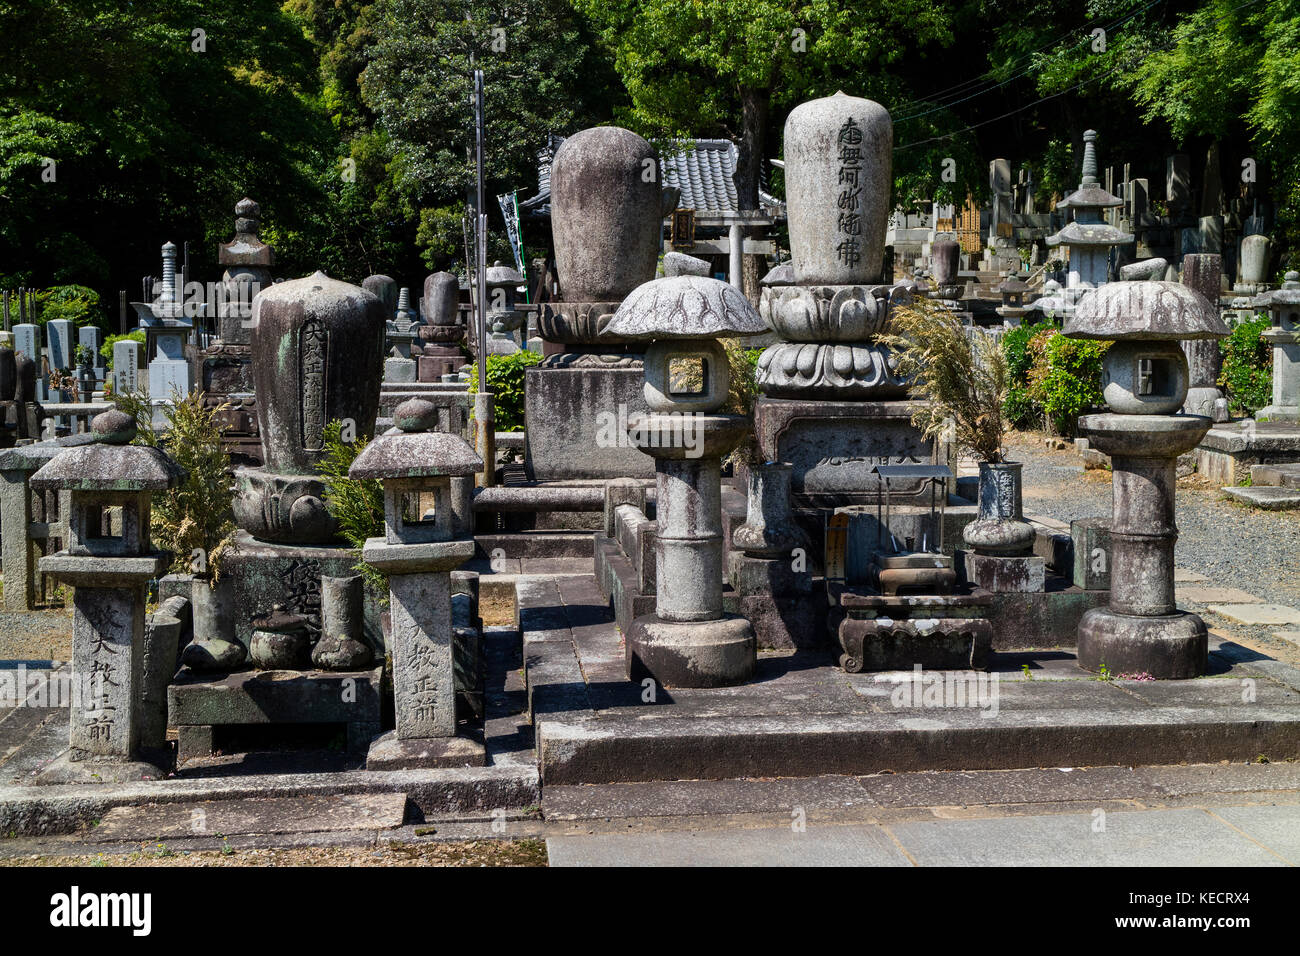 Kyoto, Japan - May 19, 2017: Old graves and headstones of the deceased at a Buddhist cemetery behind Chion-In temple in ancient Kyoto, Japan Stock Photo